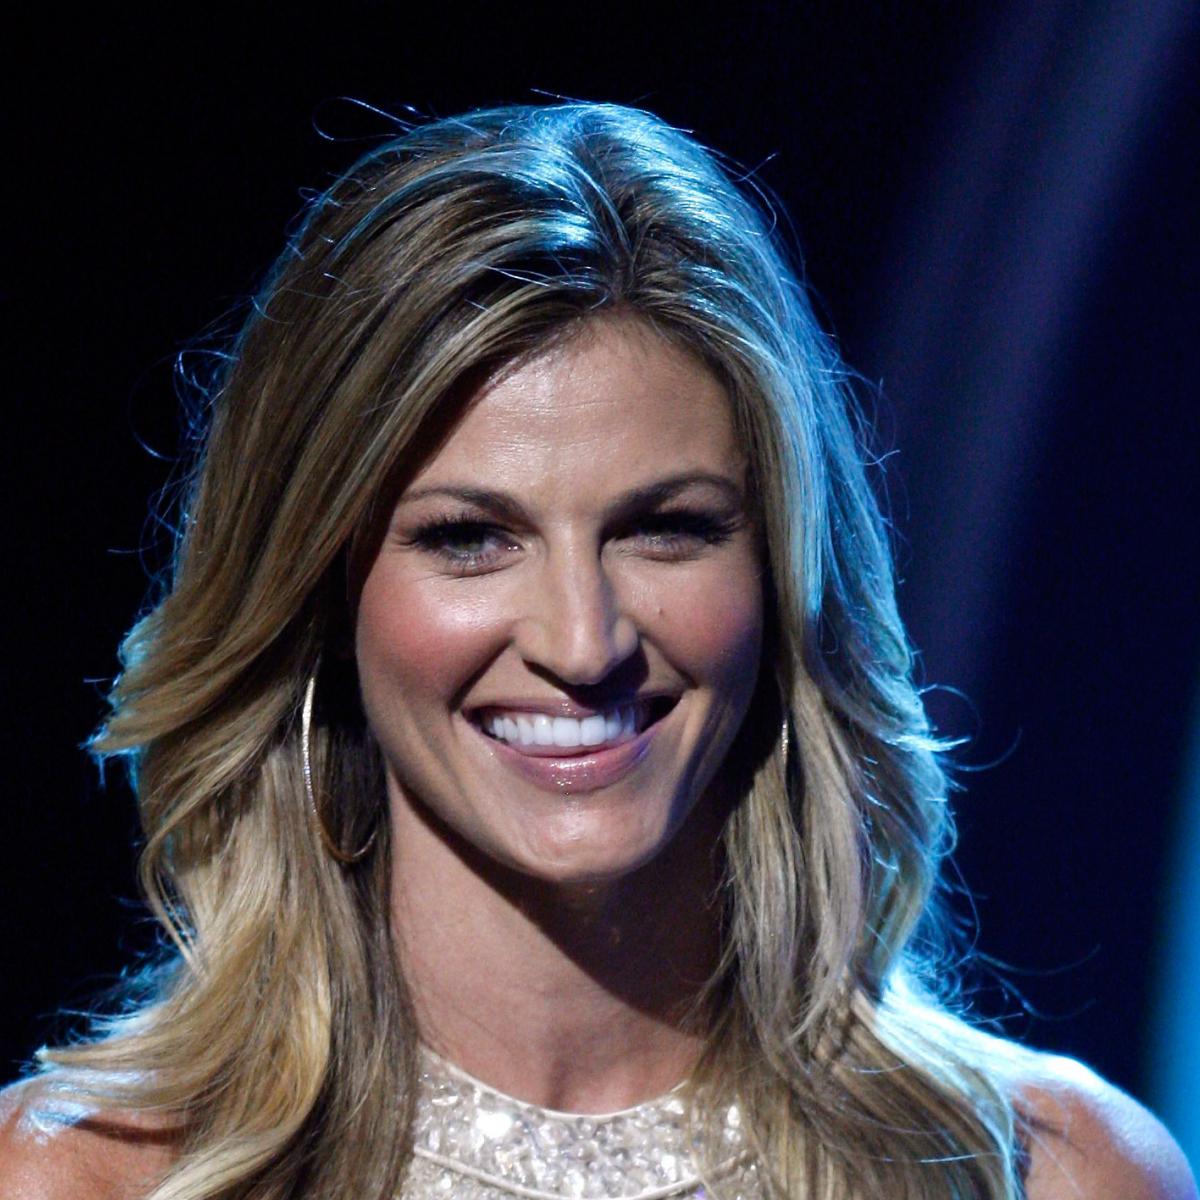 Erin Andrews: Popular Personality Made Right Move Leaving ESPN for Fox